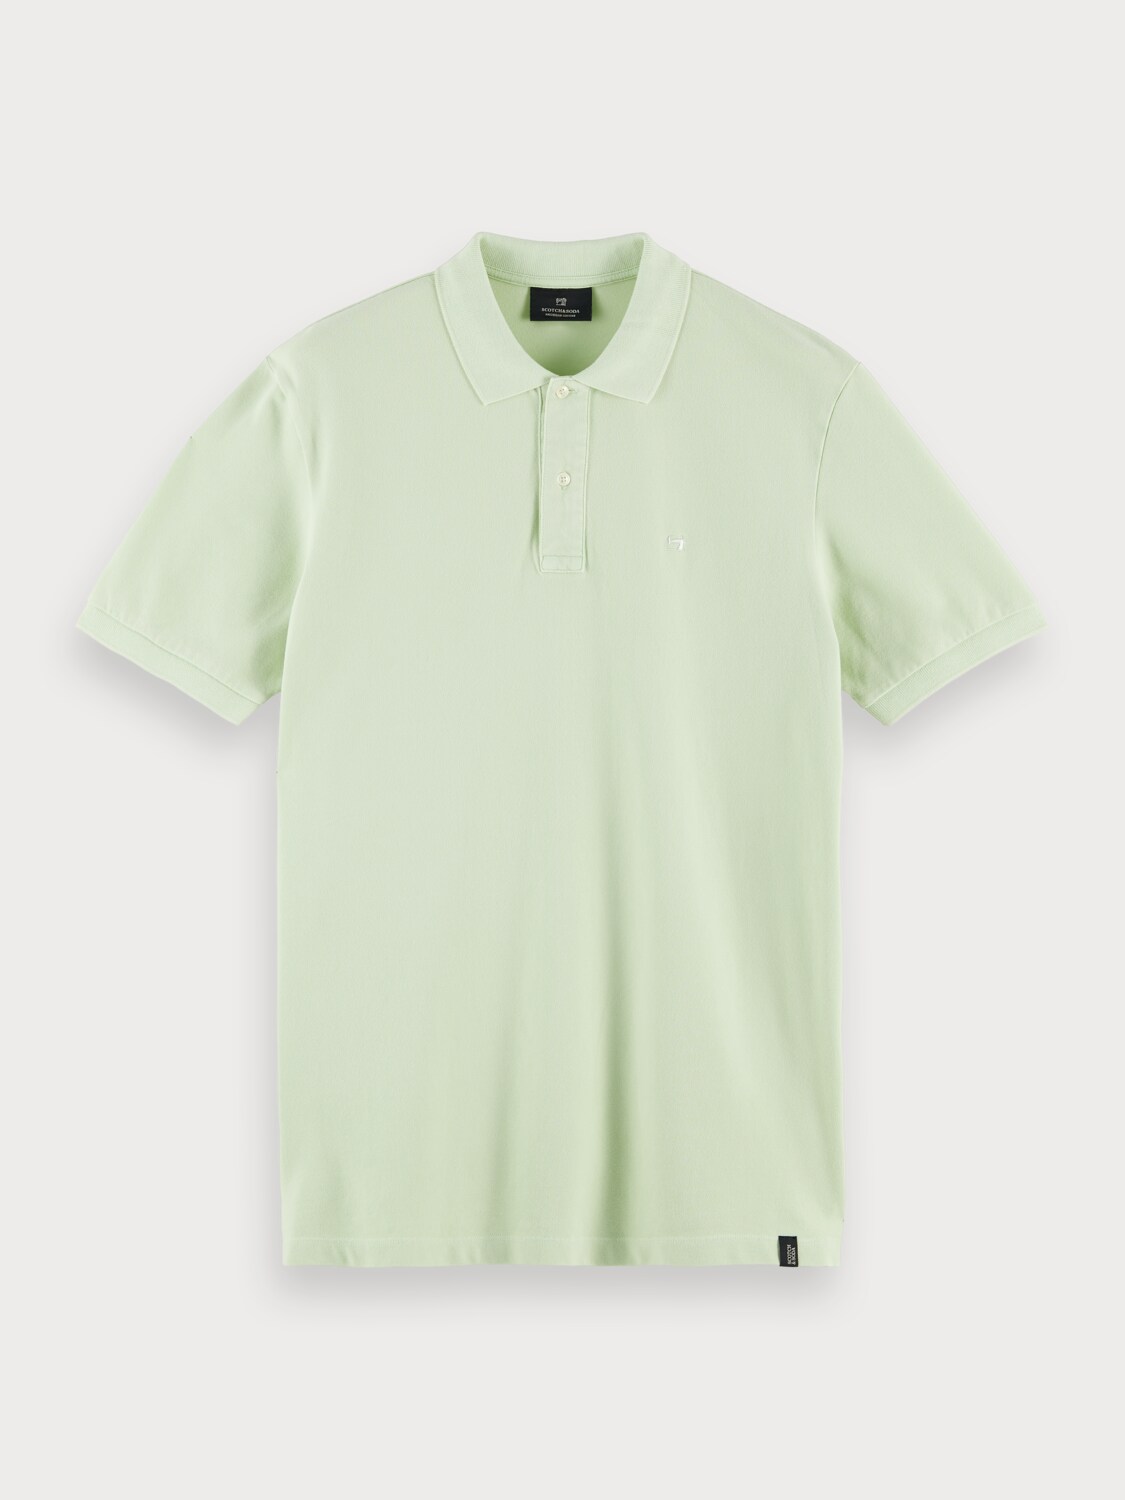 Organic cotton garment-dyed pique polo with washing